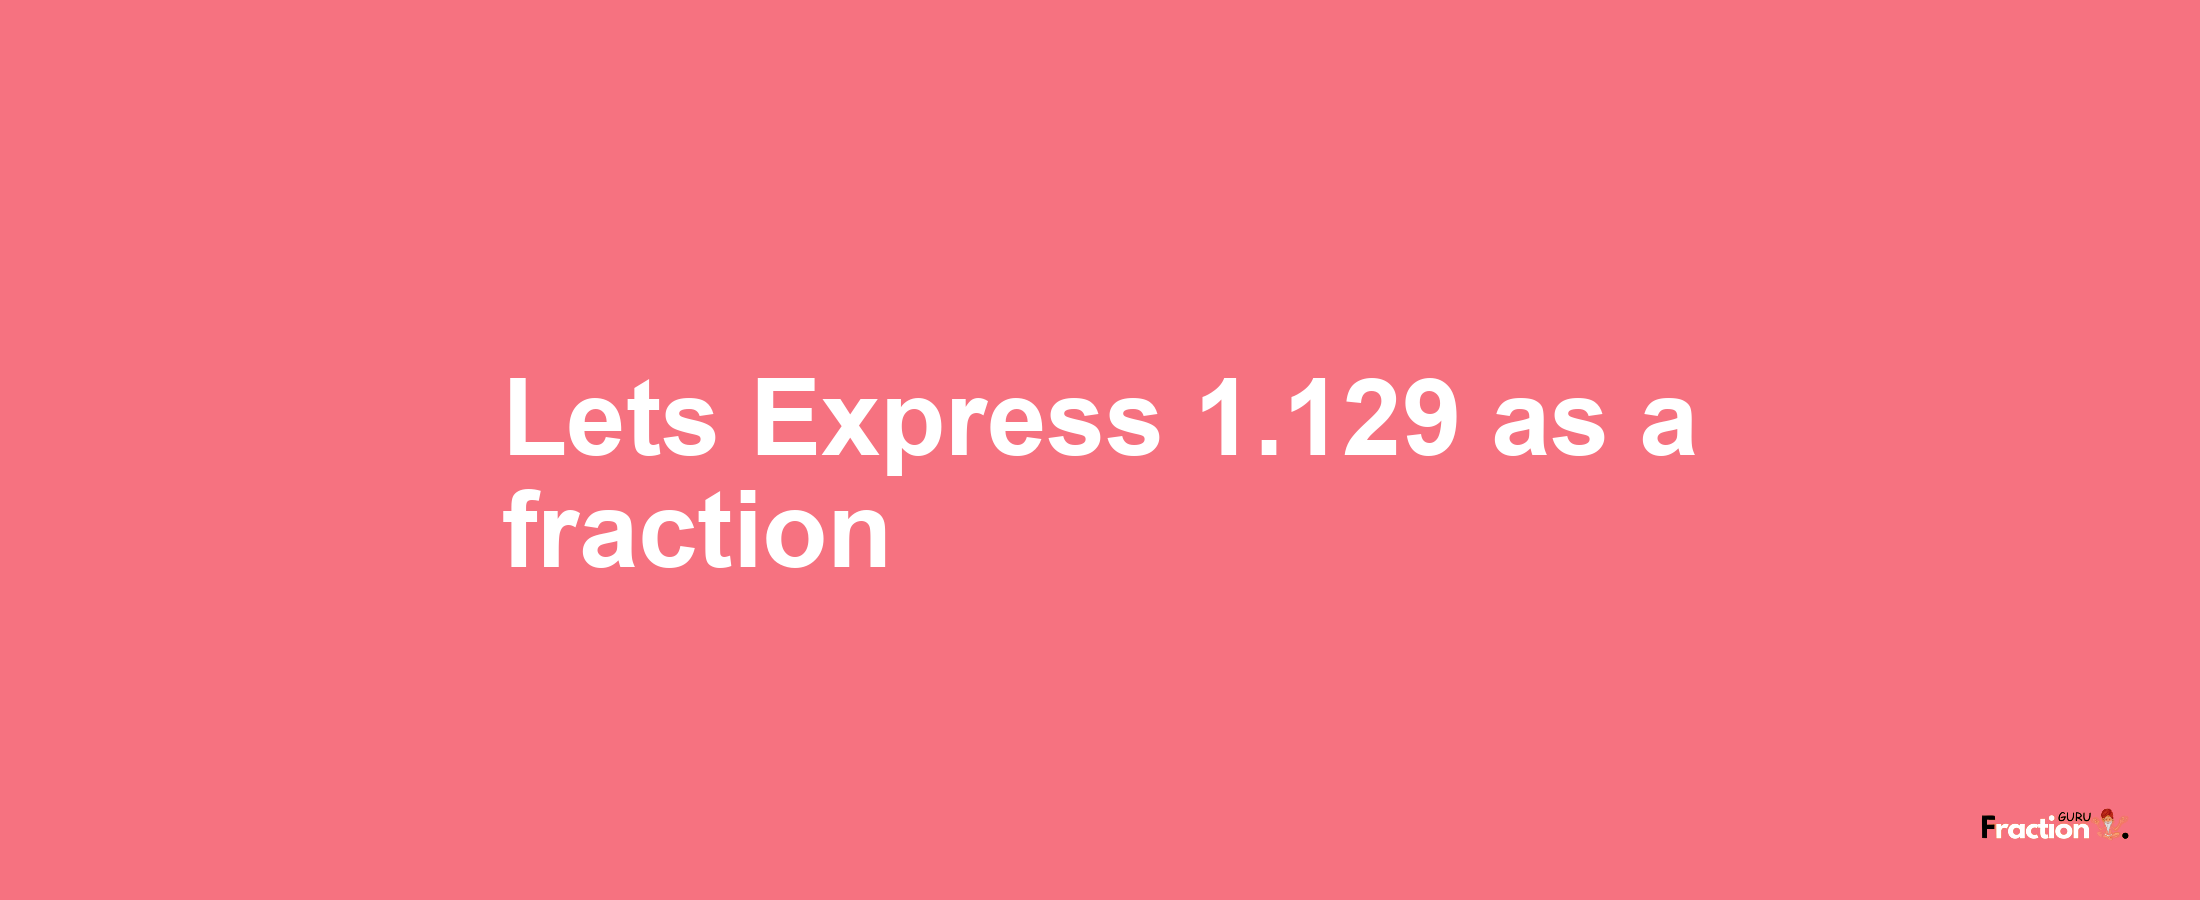 Lets Express 1.129 as afraction